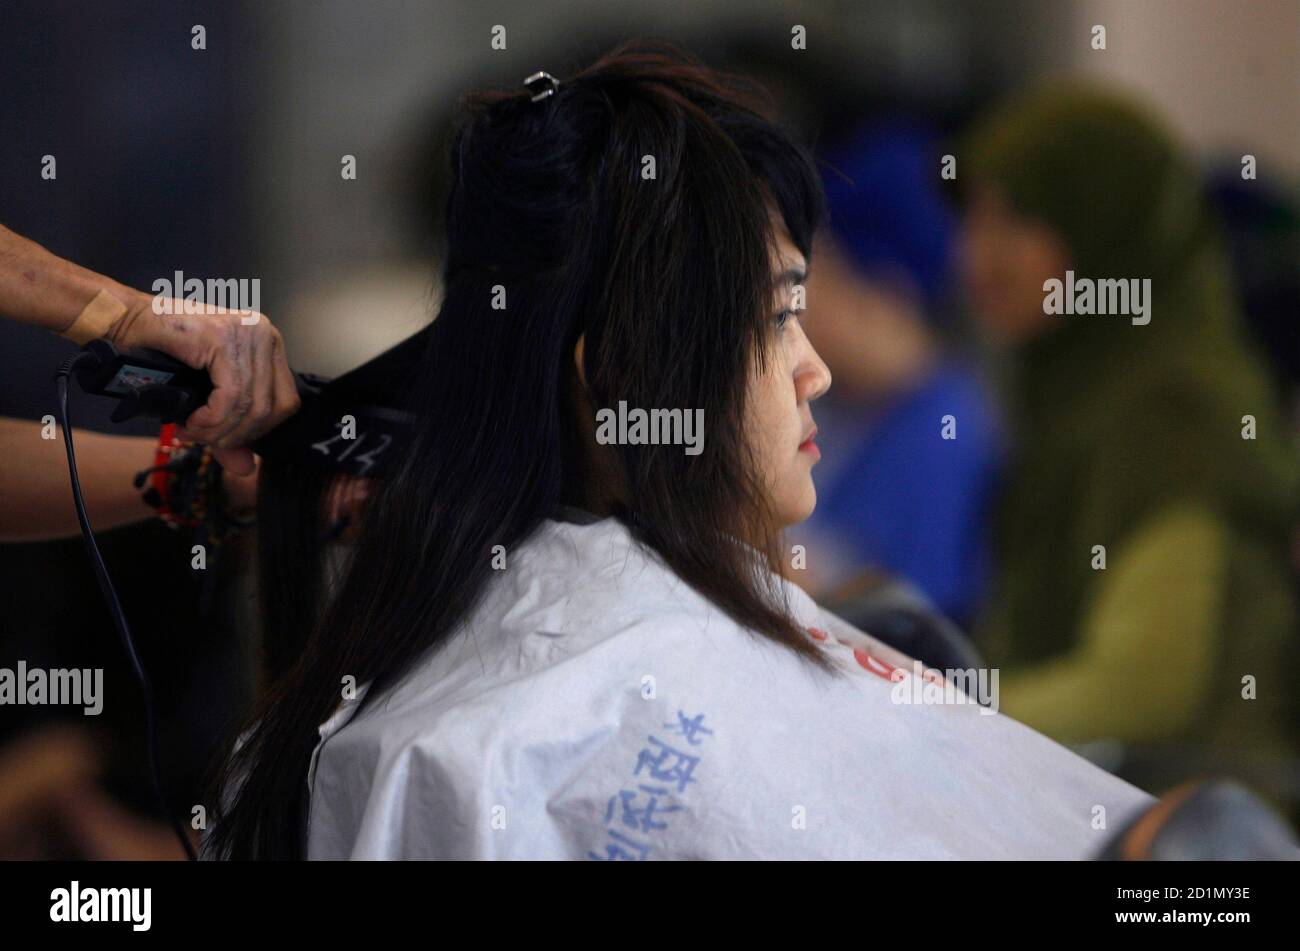 A hair stylist straighten the hair of a customer in a hairdressing salon in  Surabaya, East Java province January 21, 2010. Women's hair styles have  become a hot topic for Indonesia's Muslims